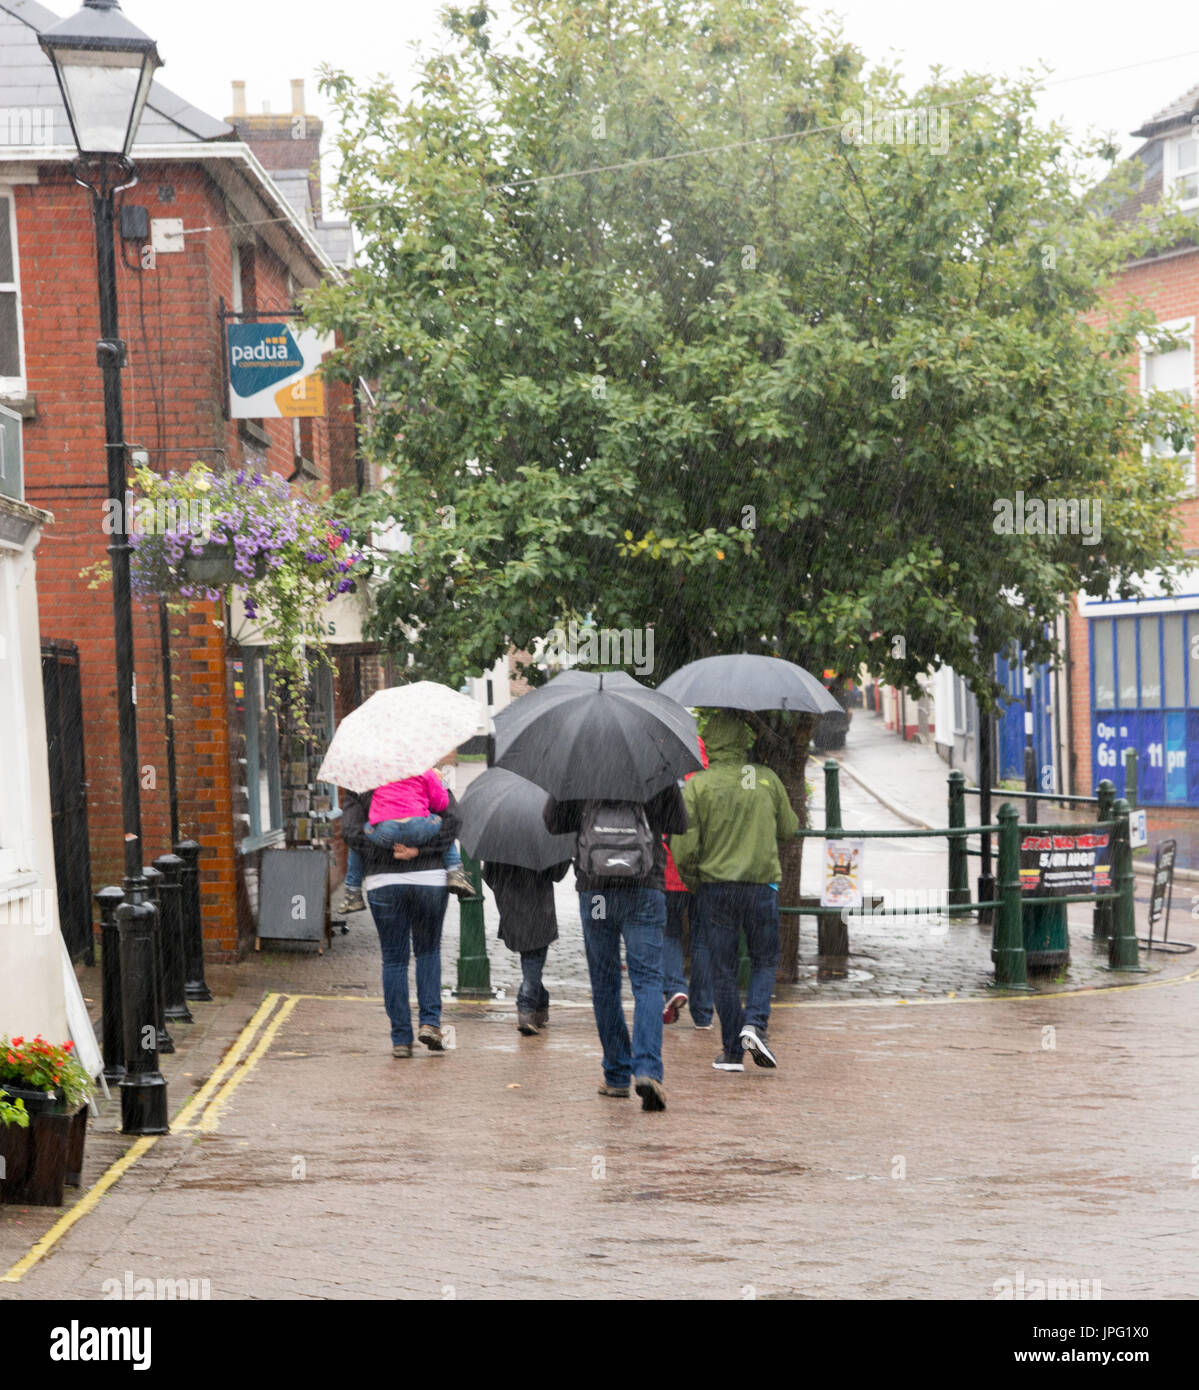 People shopping in English town with umbrellas in rain in summer, August, UK Stock Photo